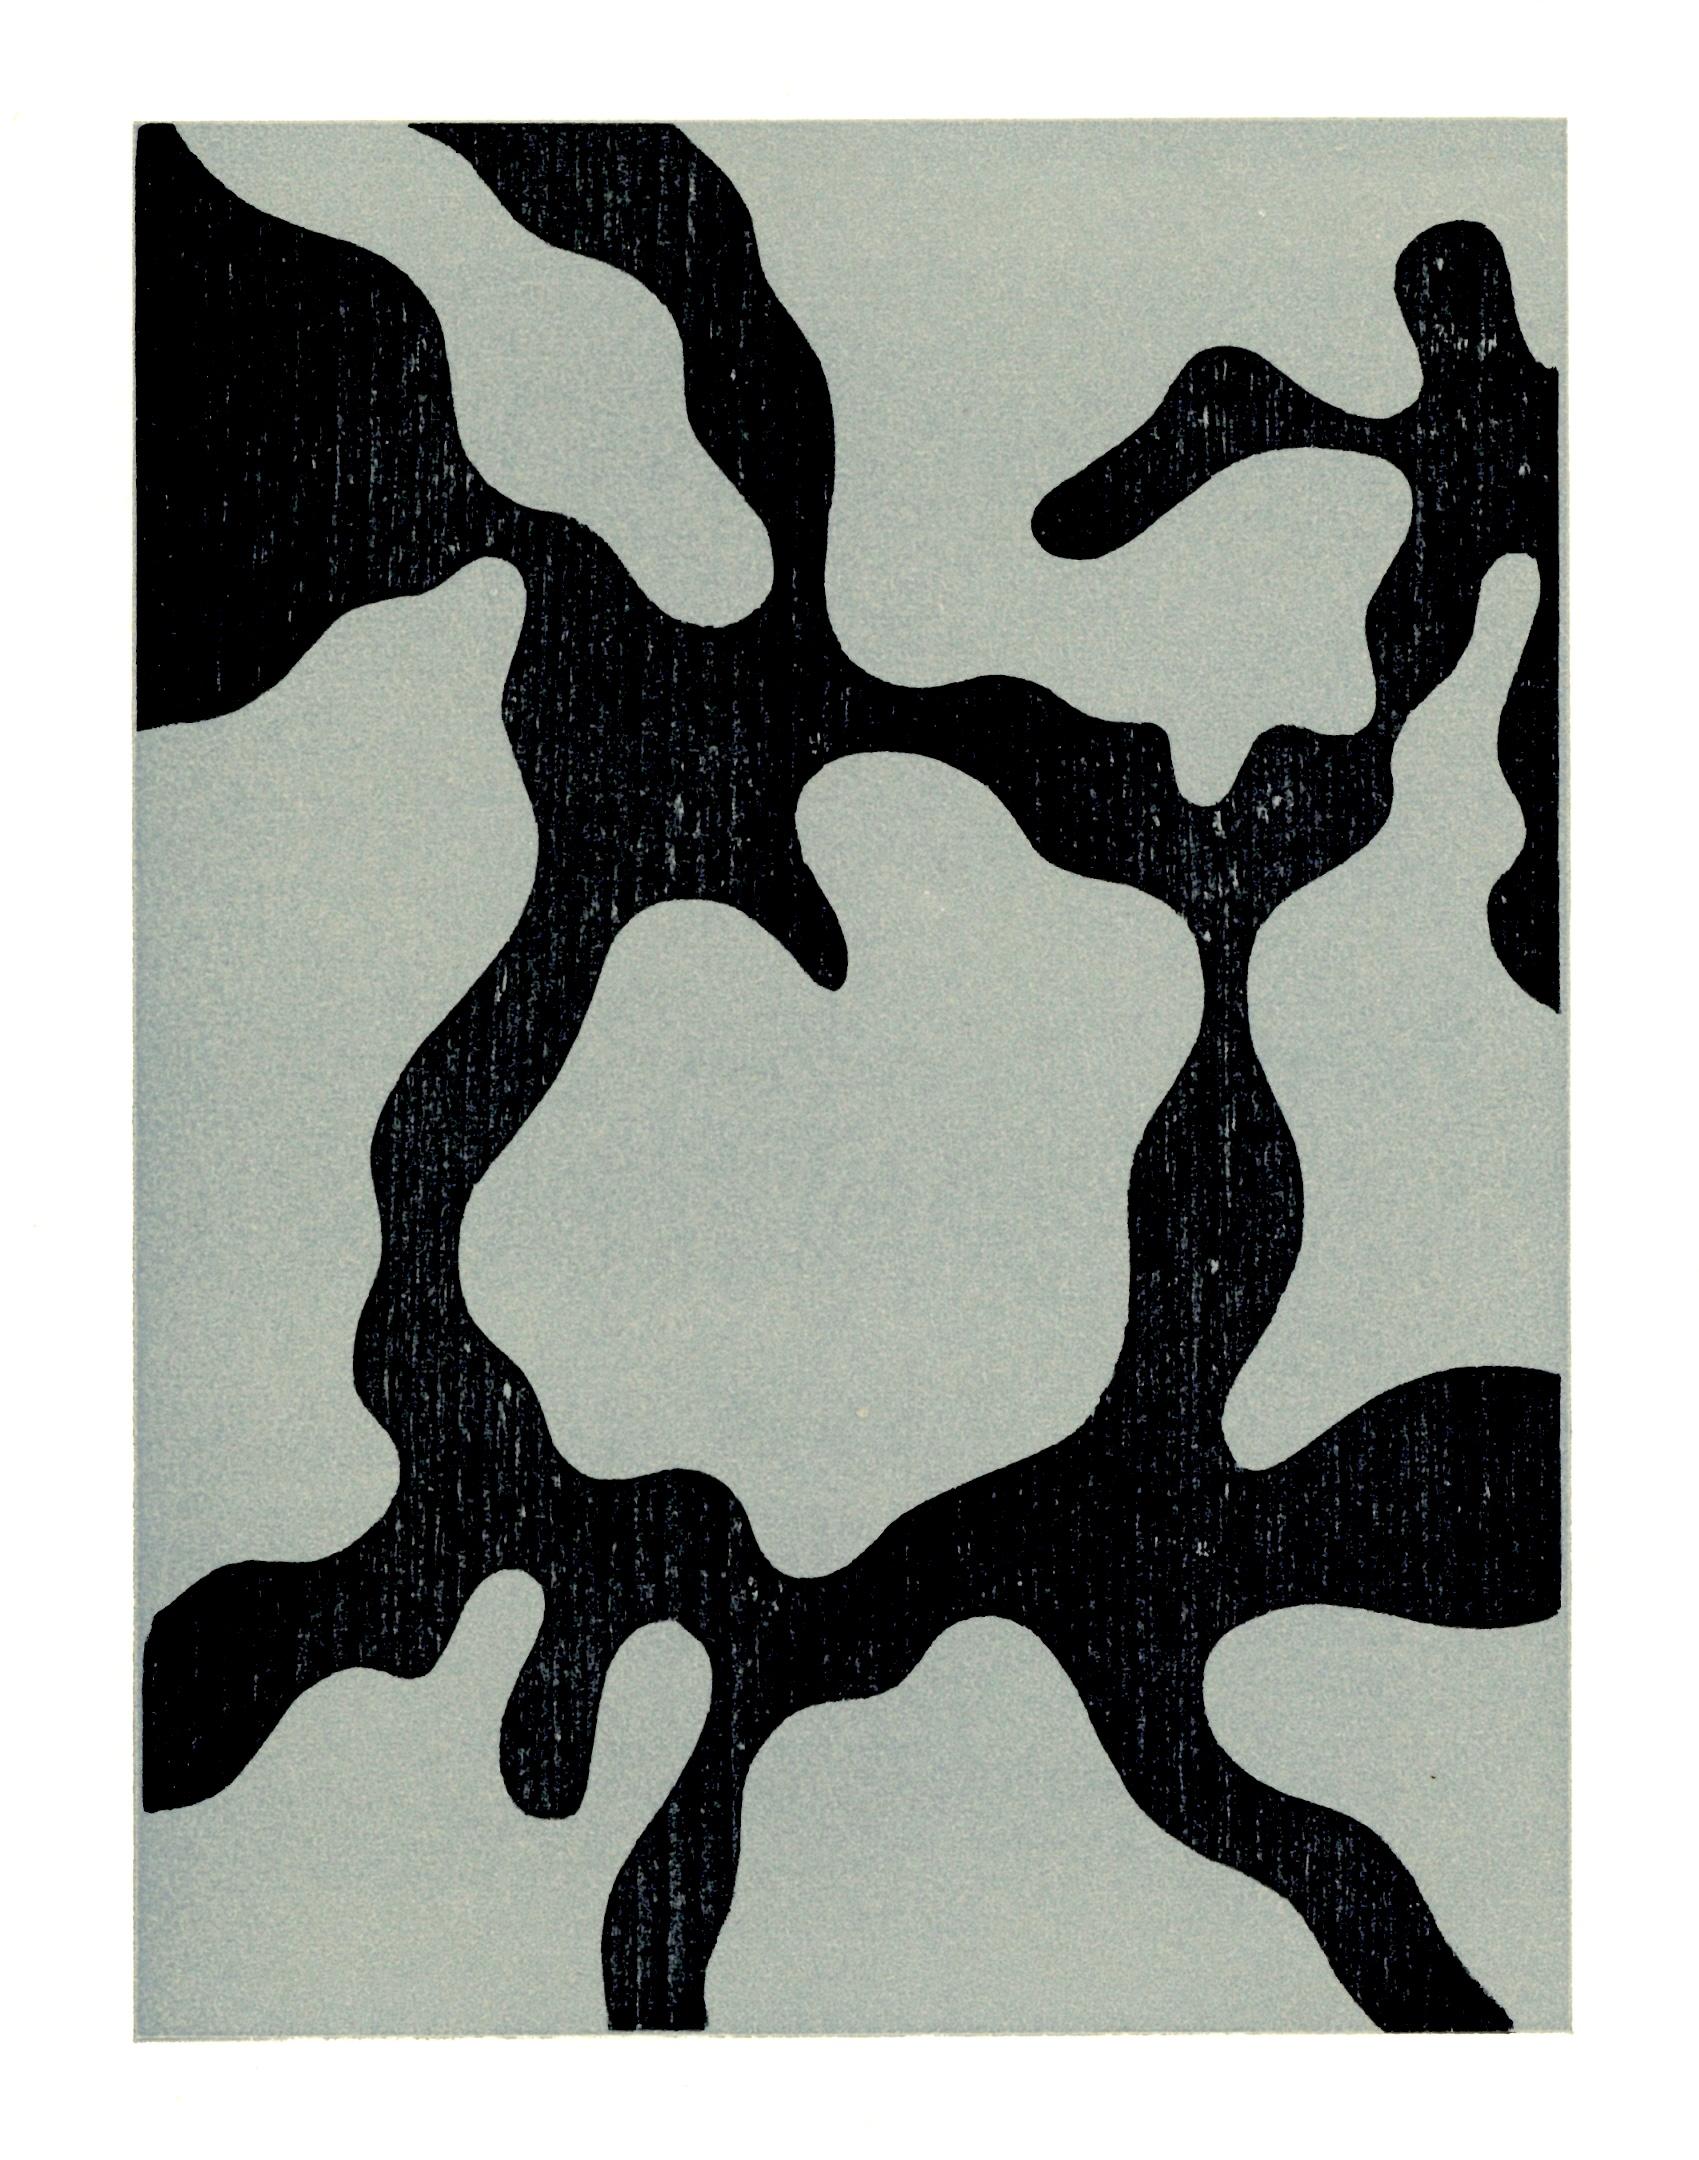 Woodcut on wove paper. Inscription: Unsigned and unnumbered, as issued. Good Condition; never framed or matted. Notes: From the volume, XXe Siècle, n°4, 1954. Published by Editions XXe Siècle, Paris; Printed by Mourlot, Paris, 1954.

JEAN ARP